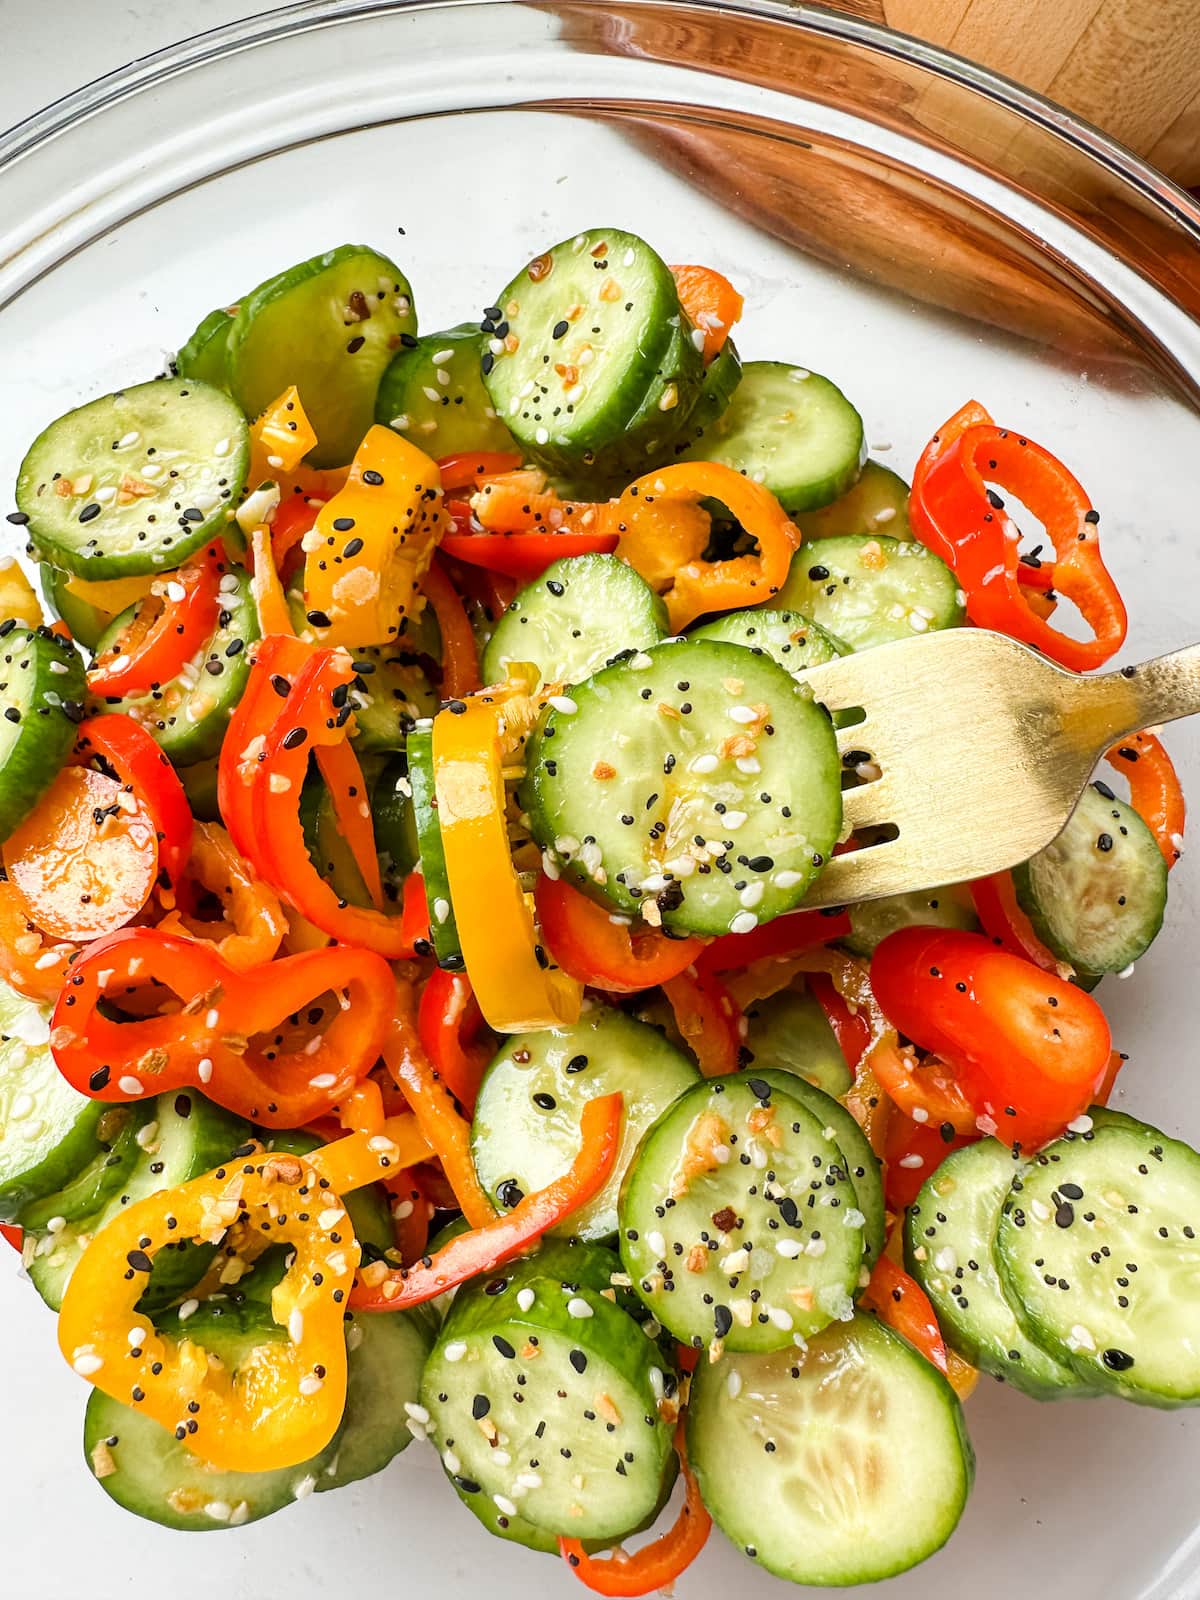 Cucumber and bell pepper salad in a clear mixing bowl with a gold fork.